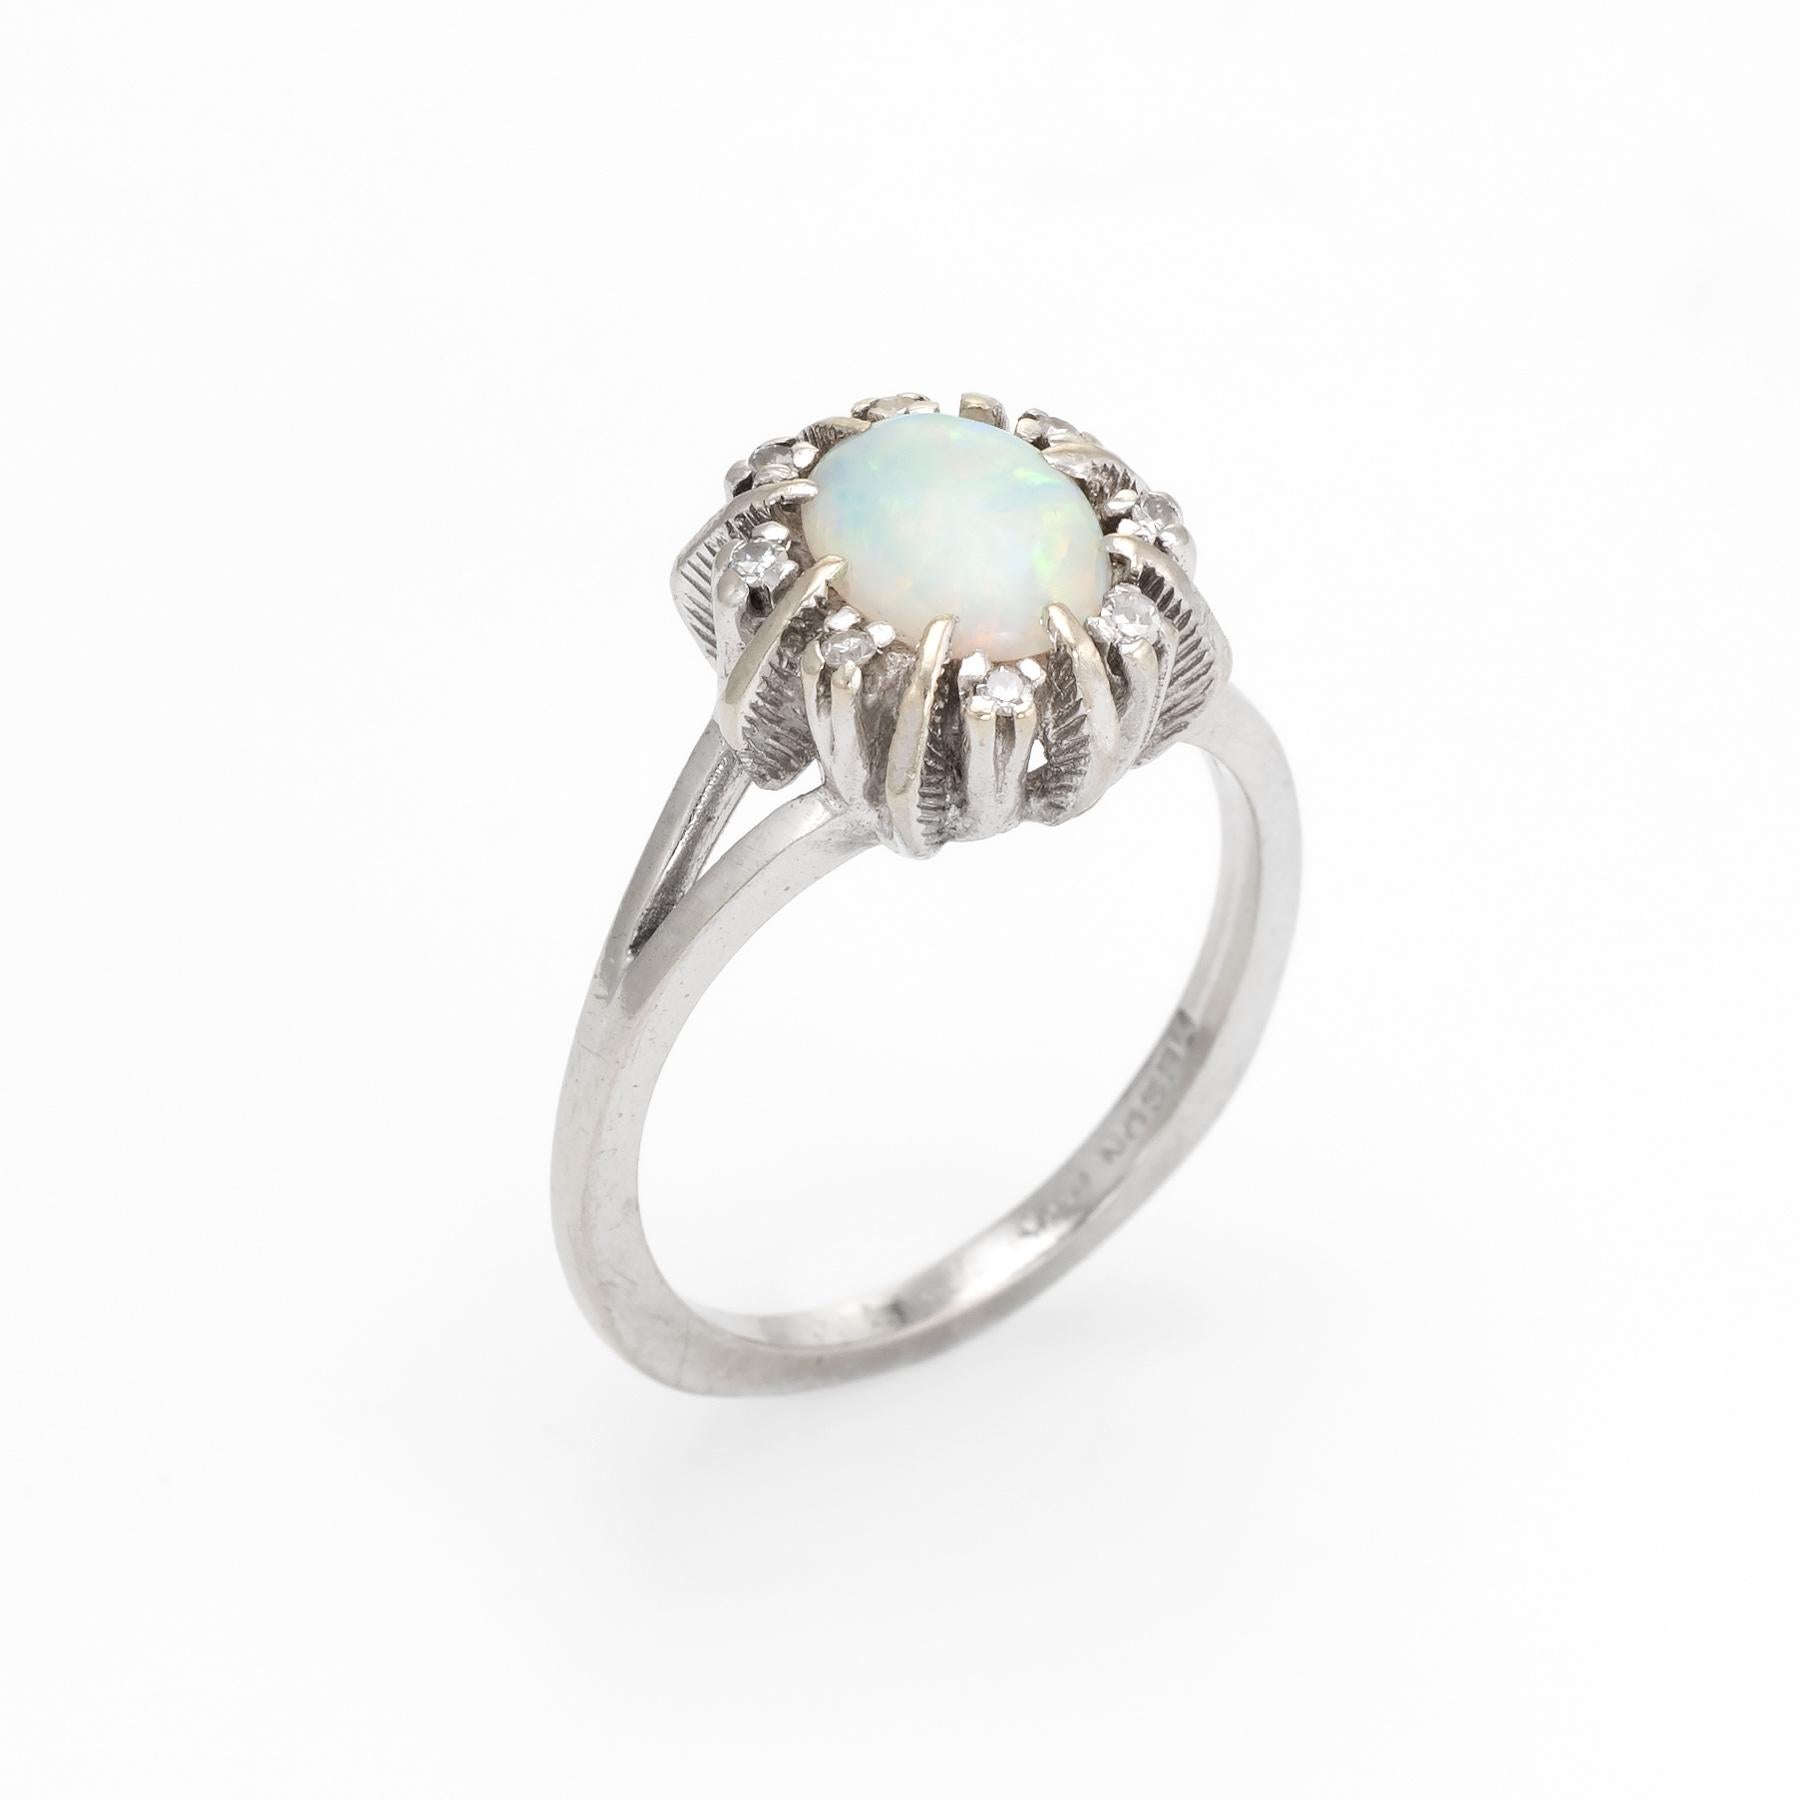 Finely detailed vintage opal & diamond cocktail ring (circa 1950s to 1960s), crafted in 14 karat white gold. 

Centrally mounted natural opal measures 7.5mm x 5.5mm (estimated at 1 carat), accented with eight estimated 0.01 carat single cut diamonds